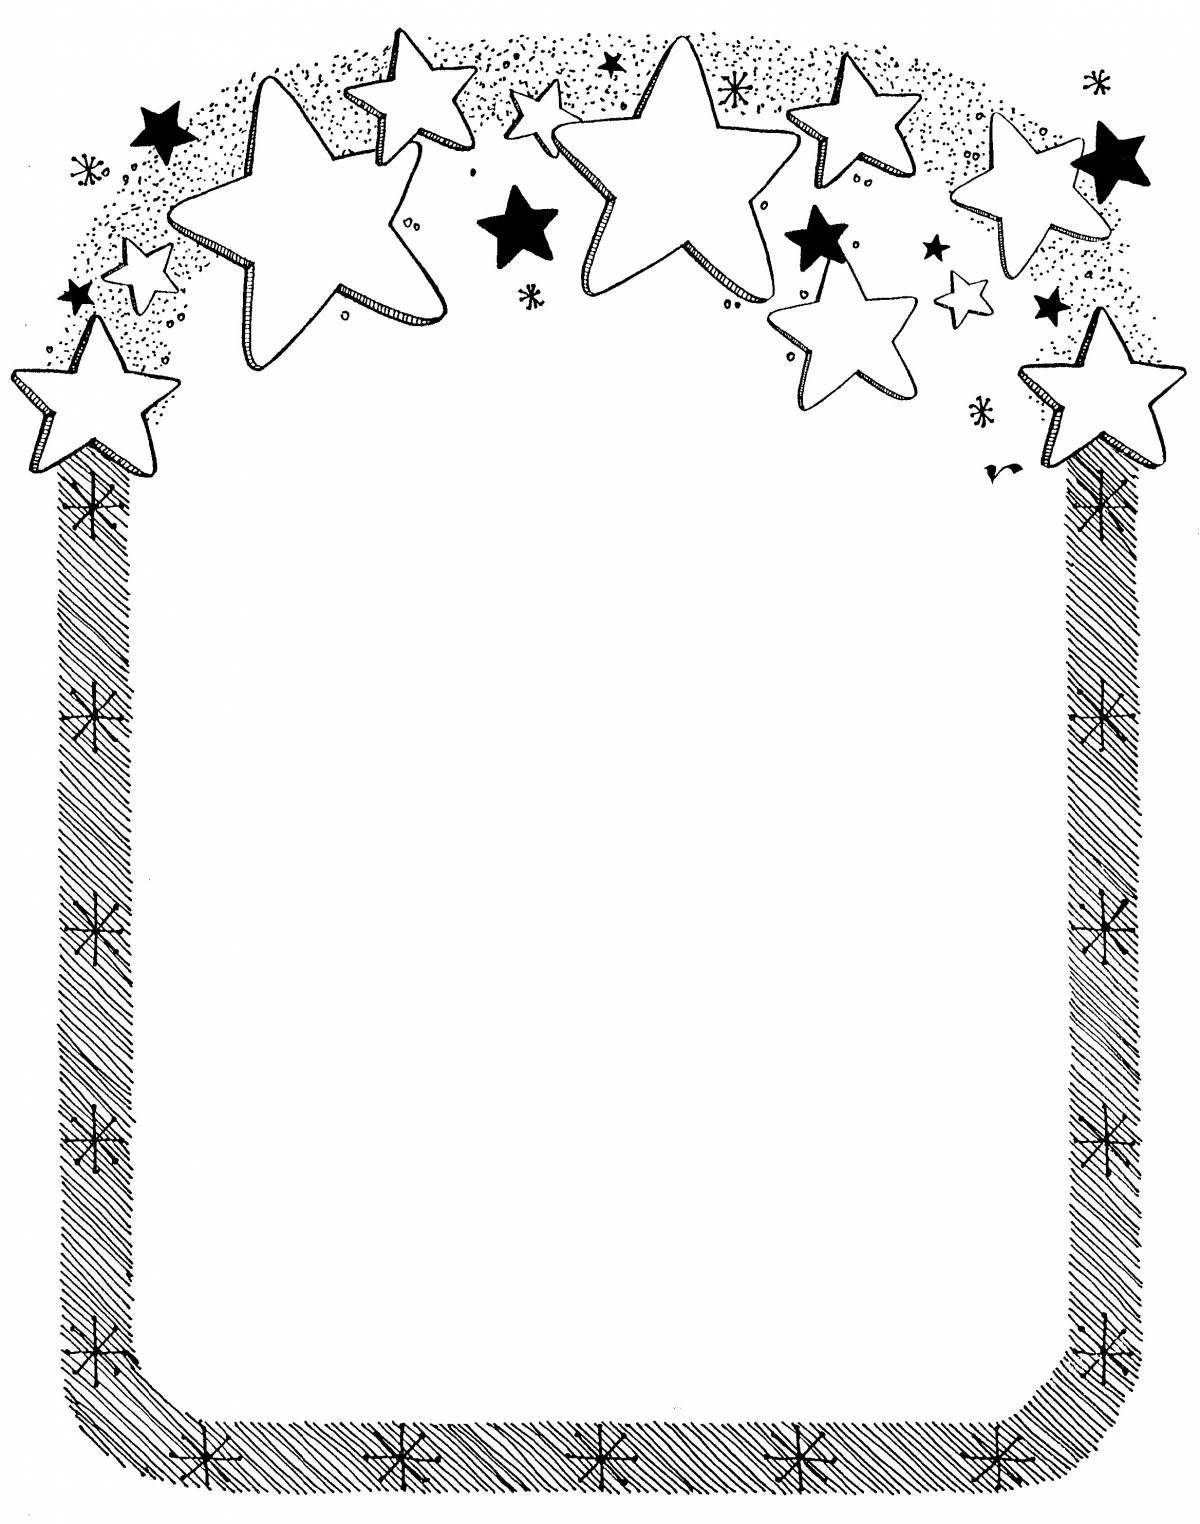 Great coloring christmas frame